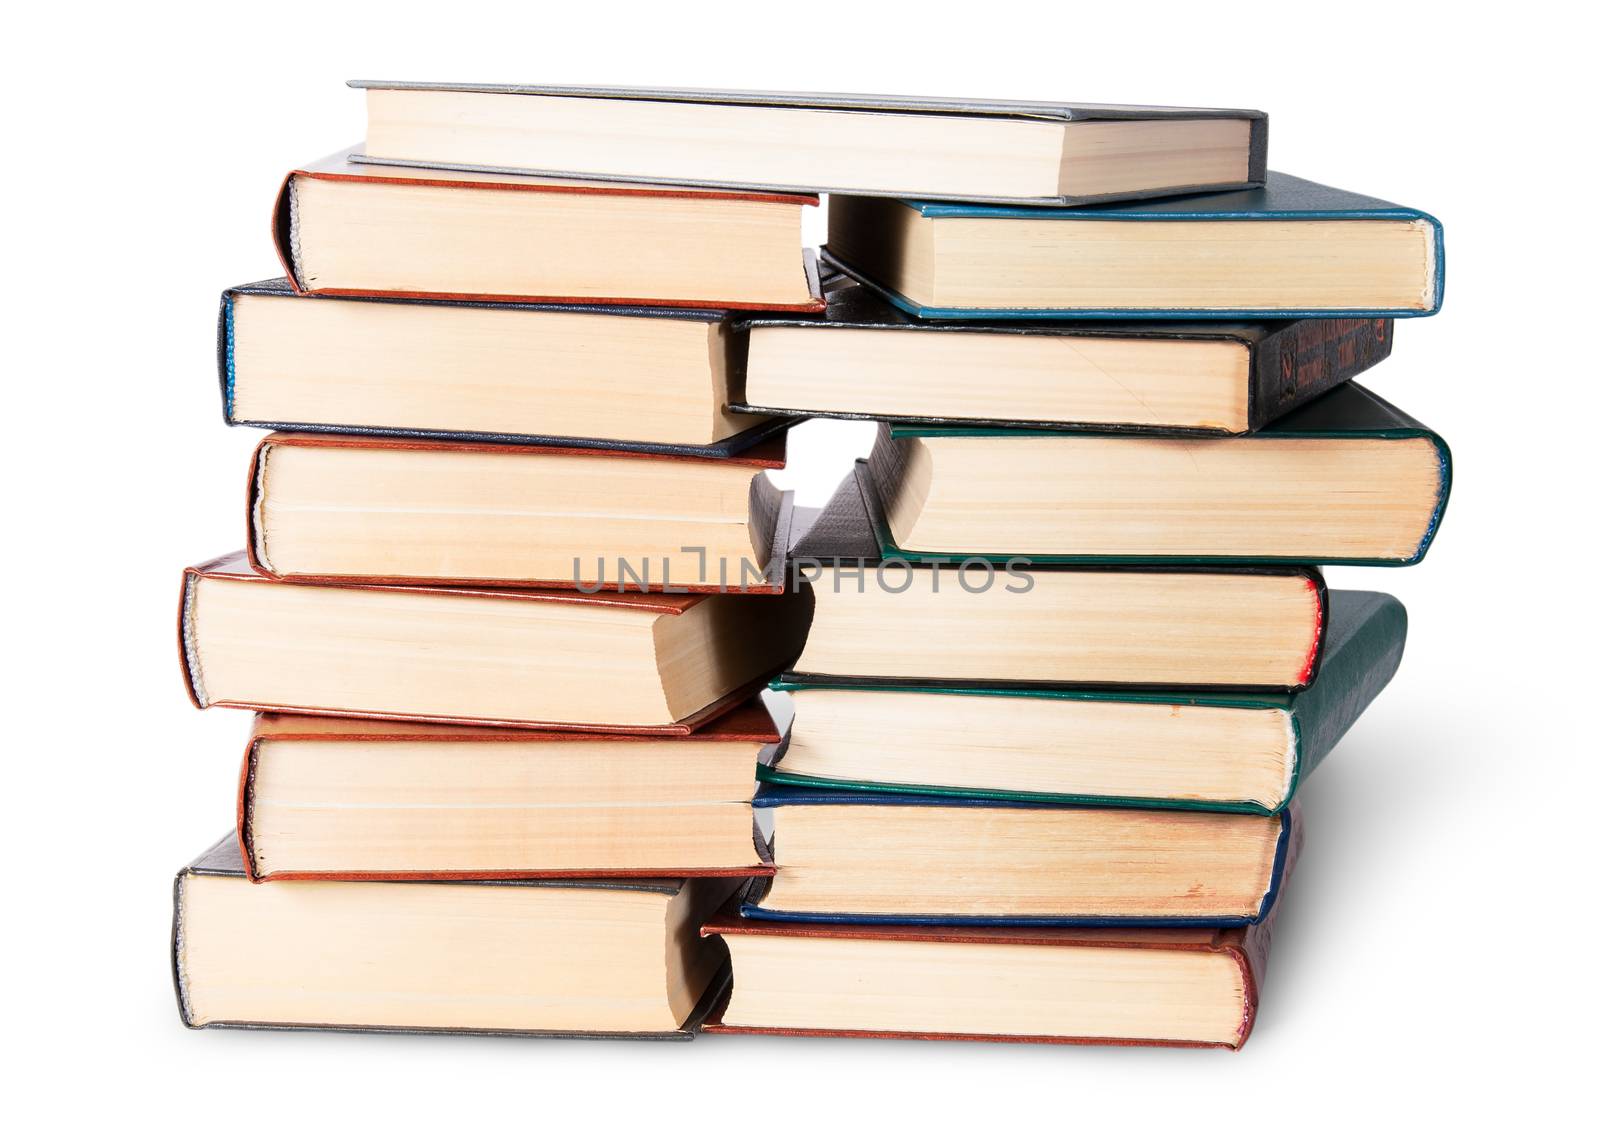 In front two stacks chaotically stacked old books isolated on white background